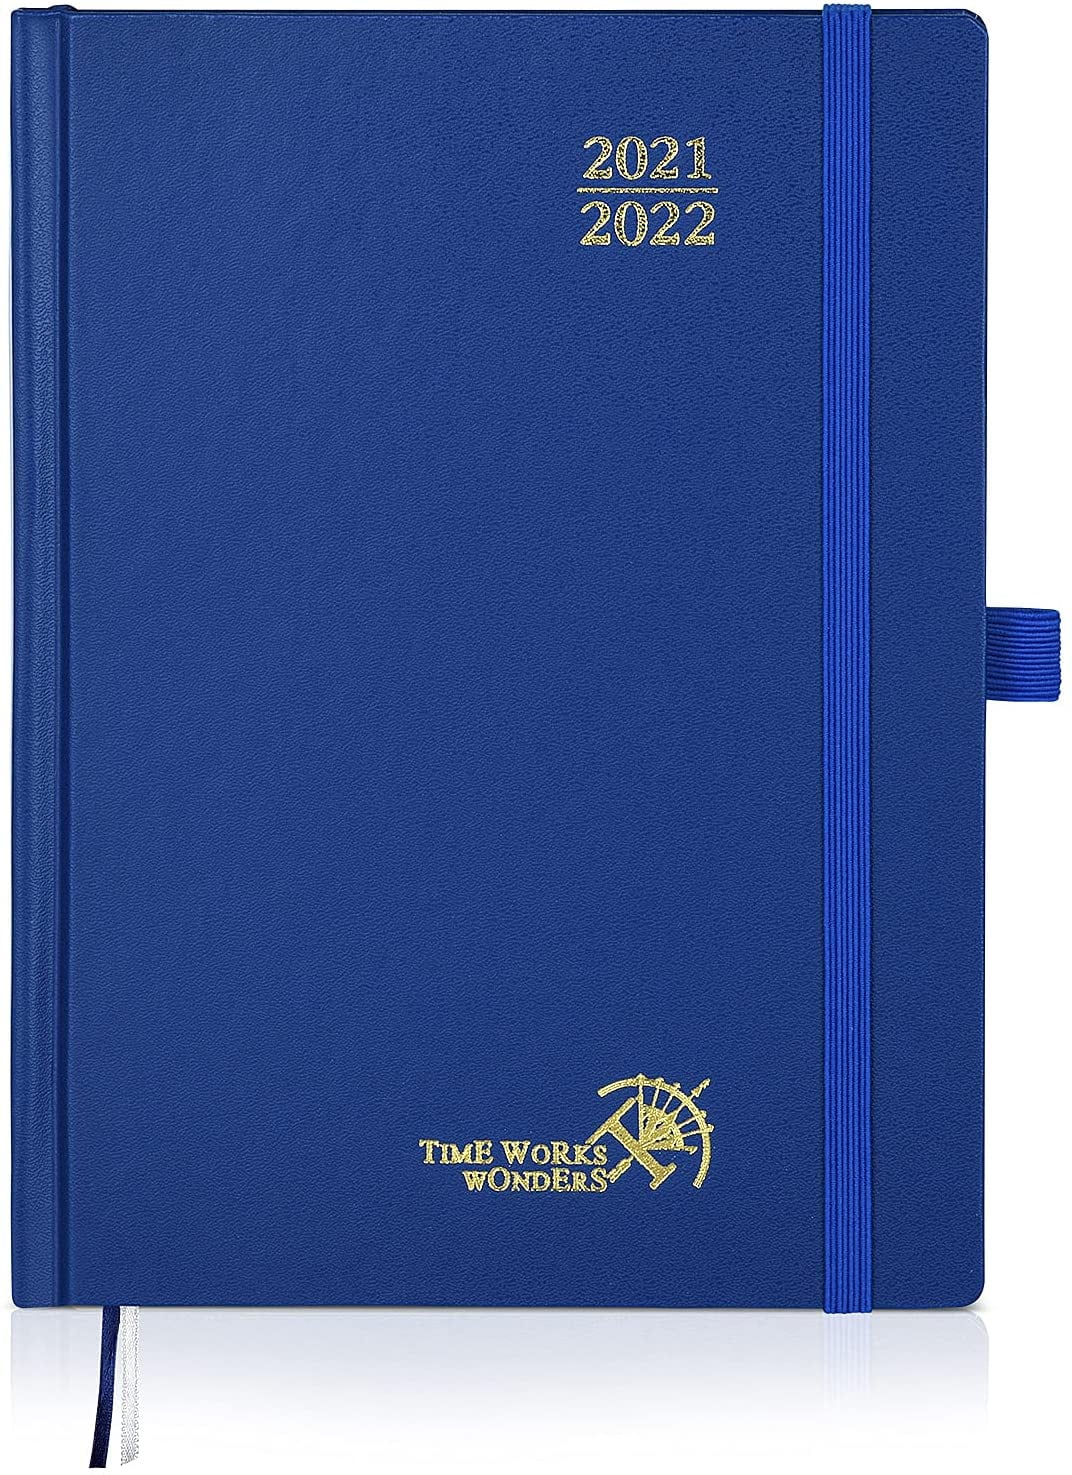 Brown POPRUN Agenda August 2021 to July 2022 with Pocket Vegan Leather Hardcover Academic Planner Hourly 2021-2022 Vertical Weekly & Monthly 8.5 x 10.5 Note & Address Pages 